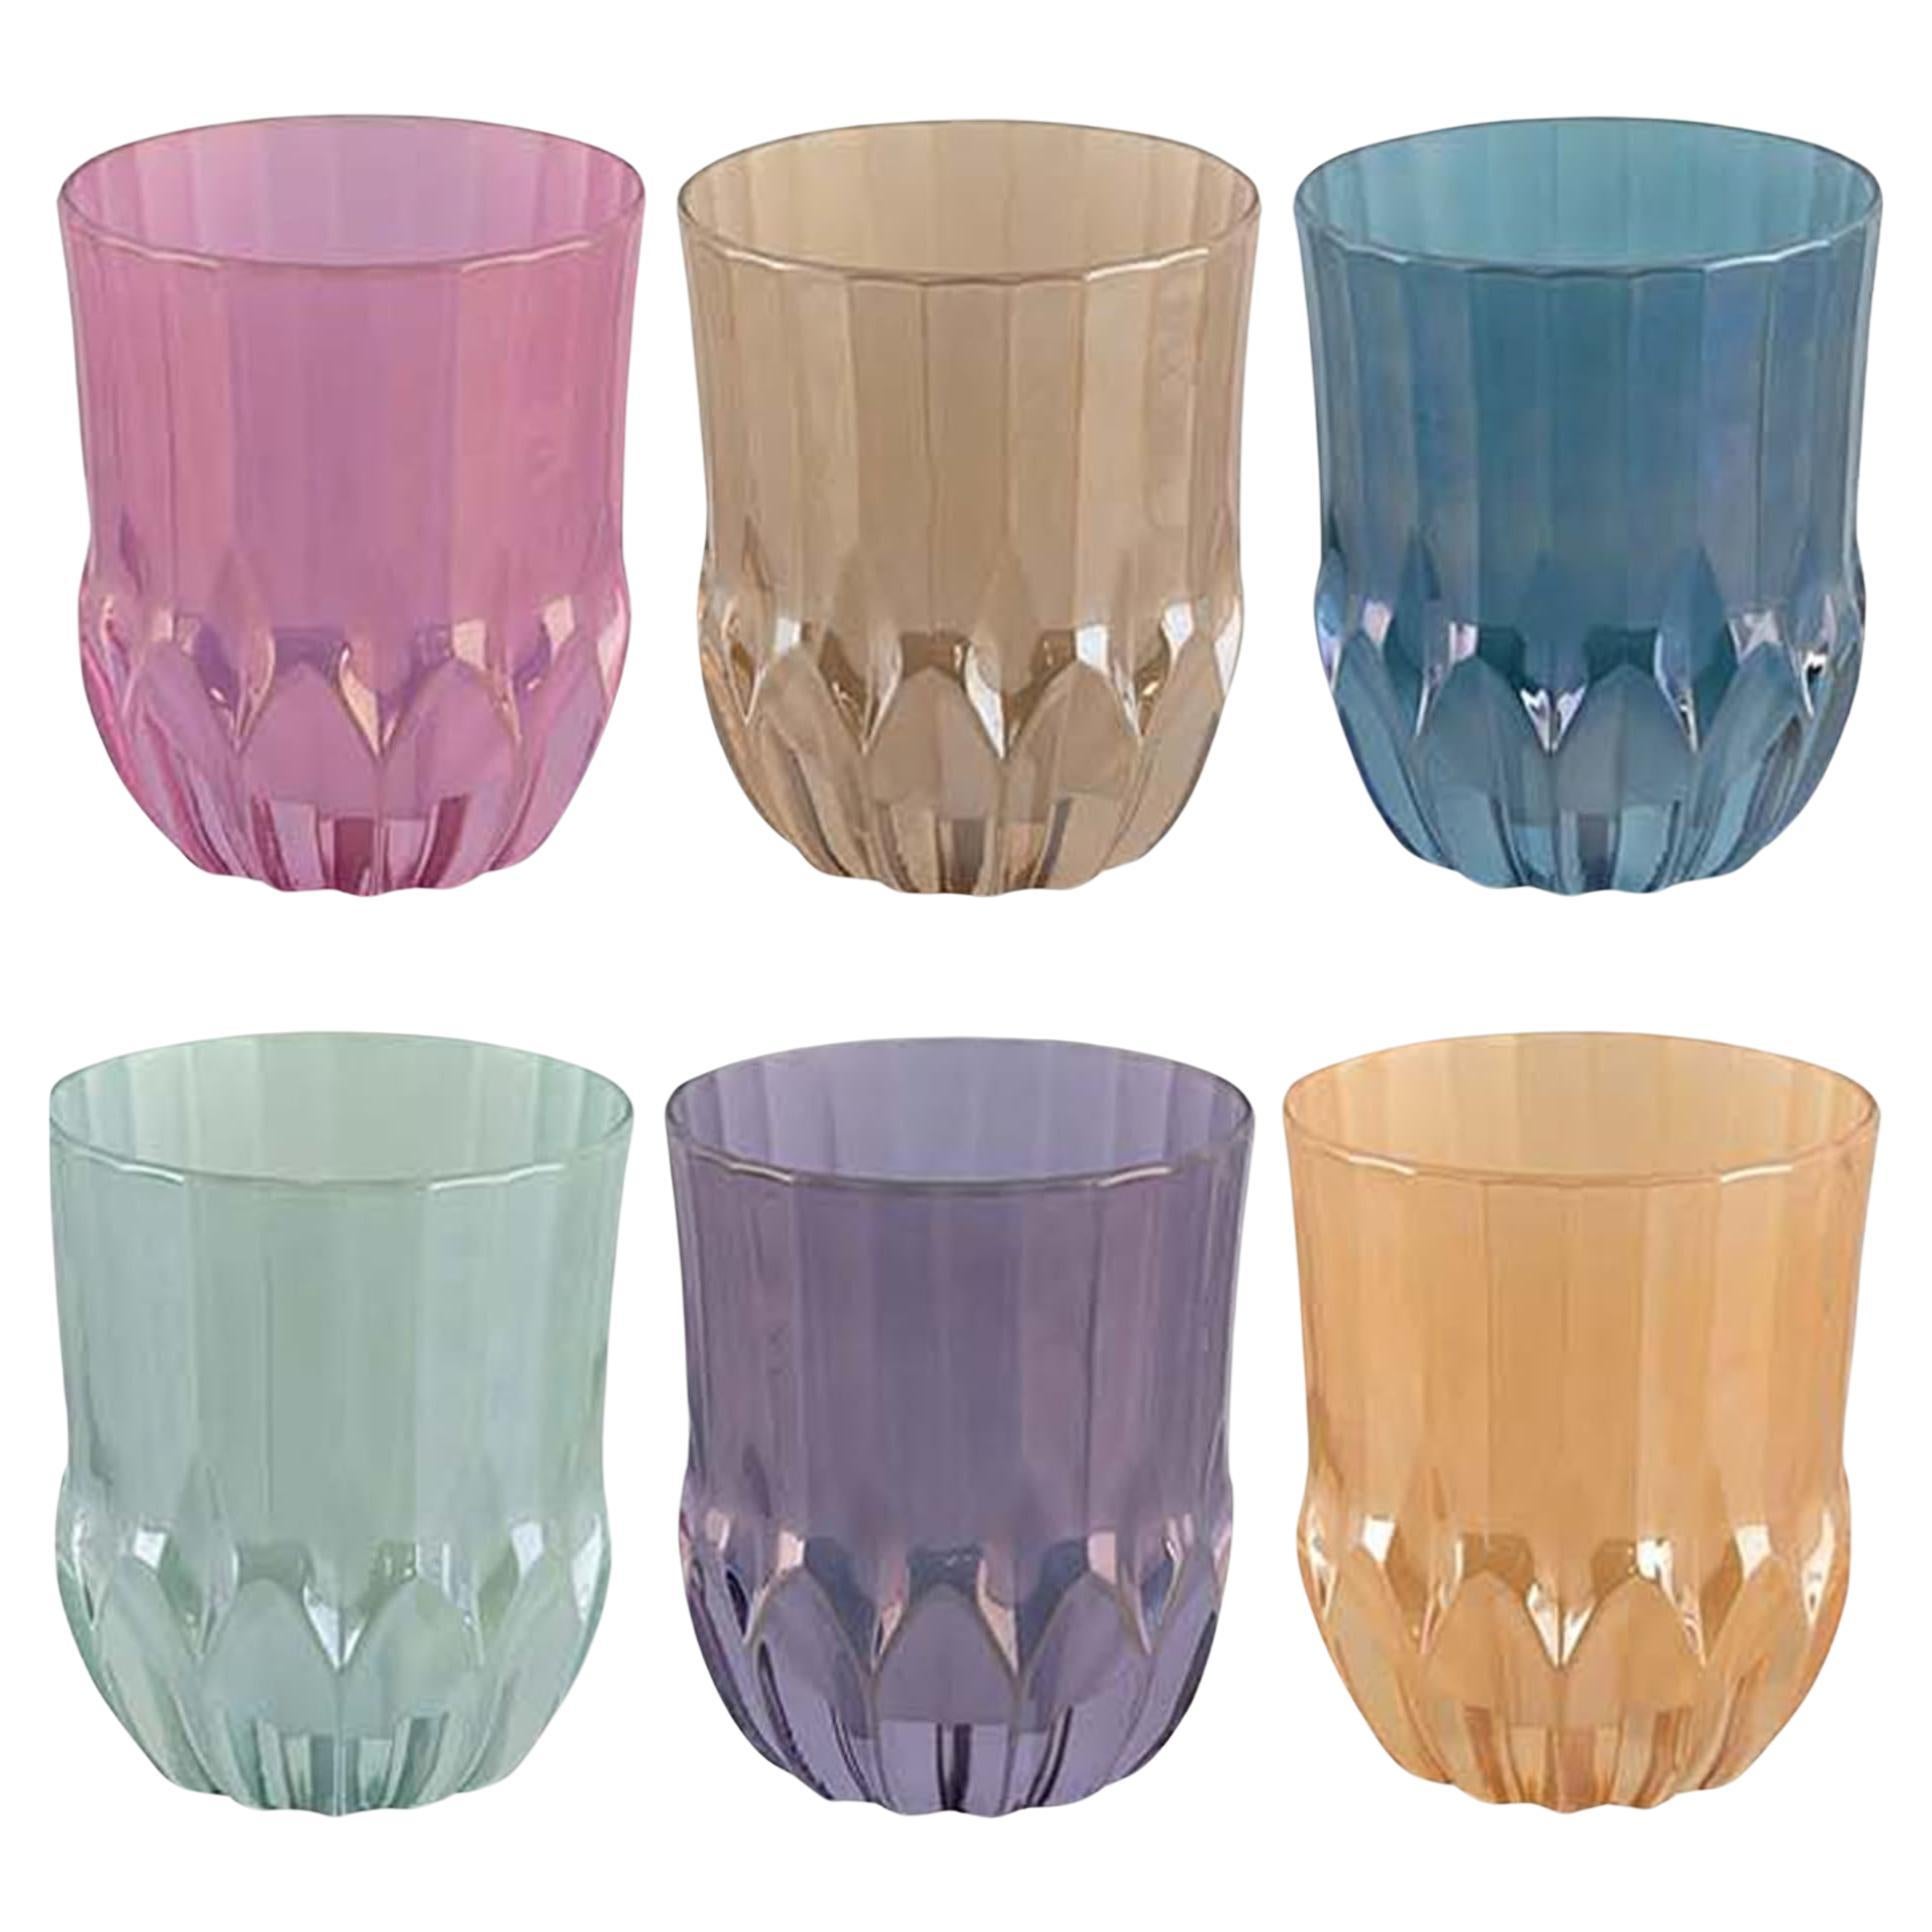 Canal Set of 6 Low Water Glasses